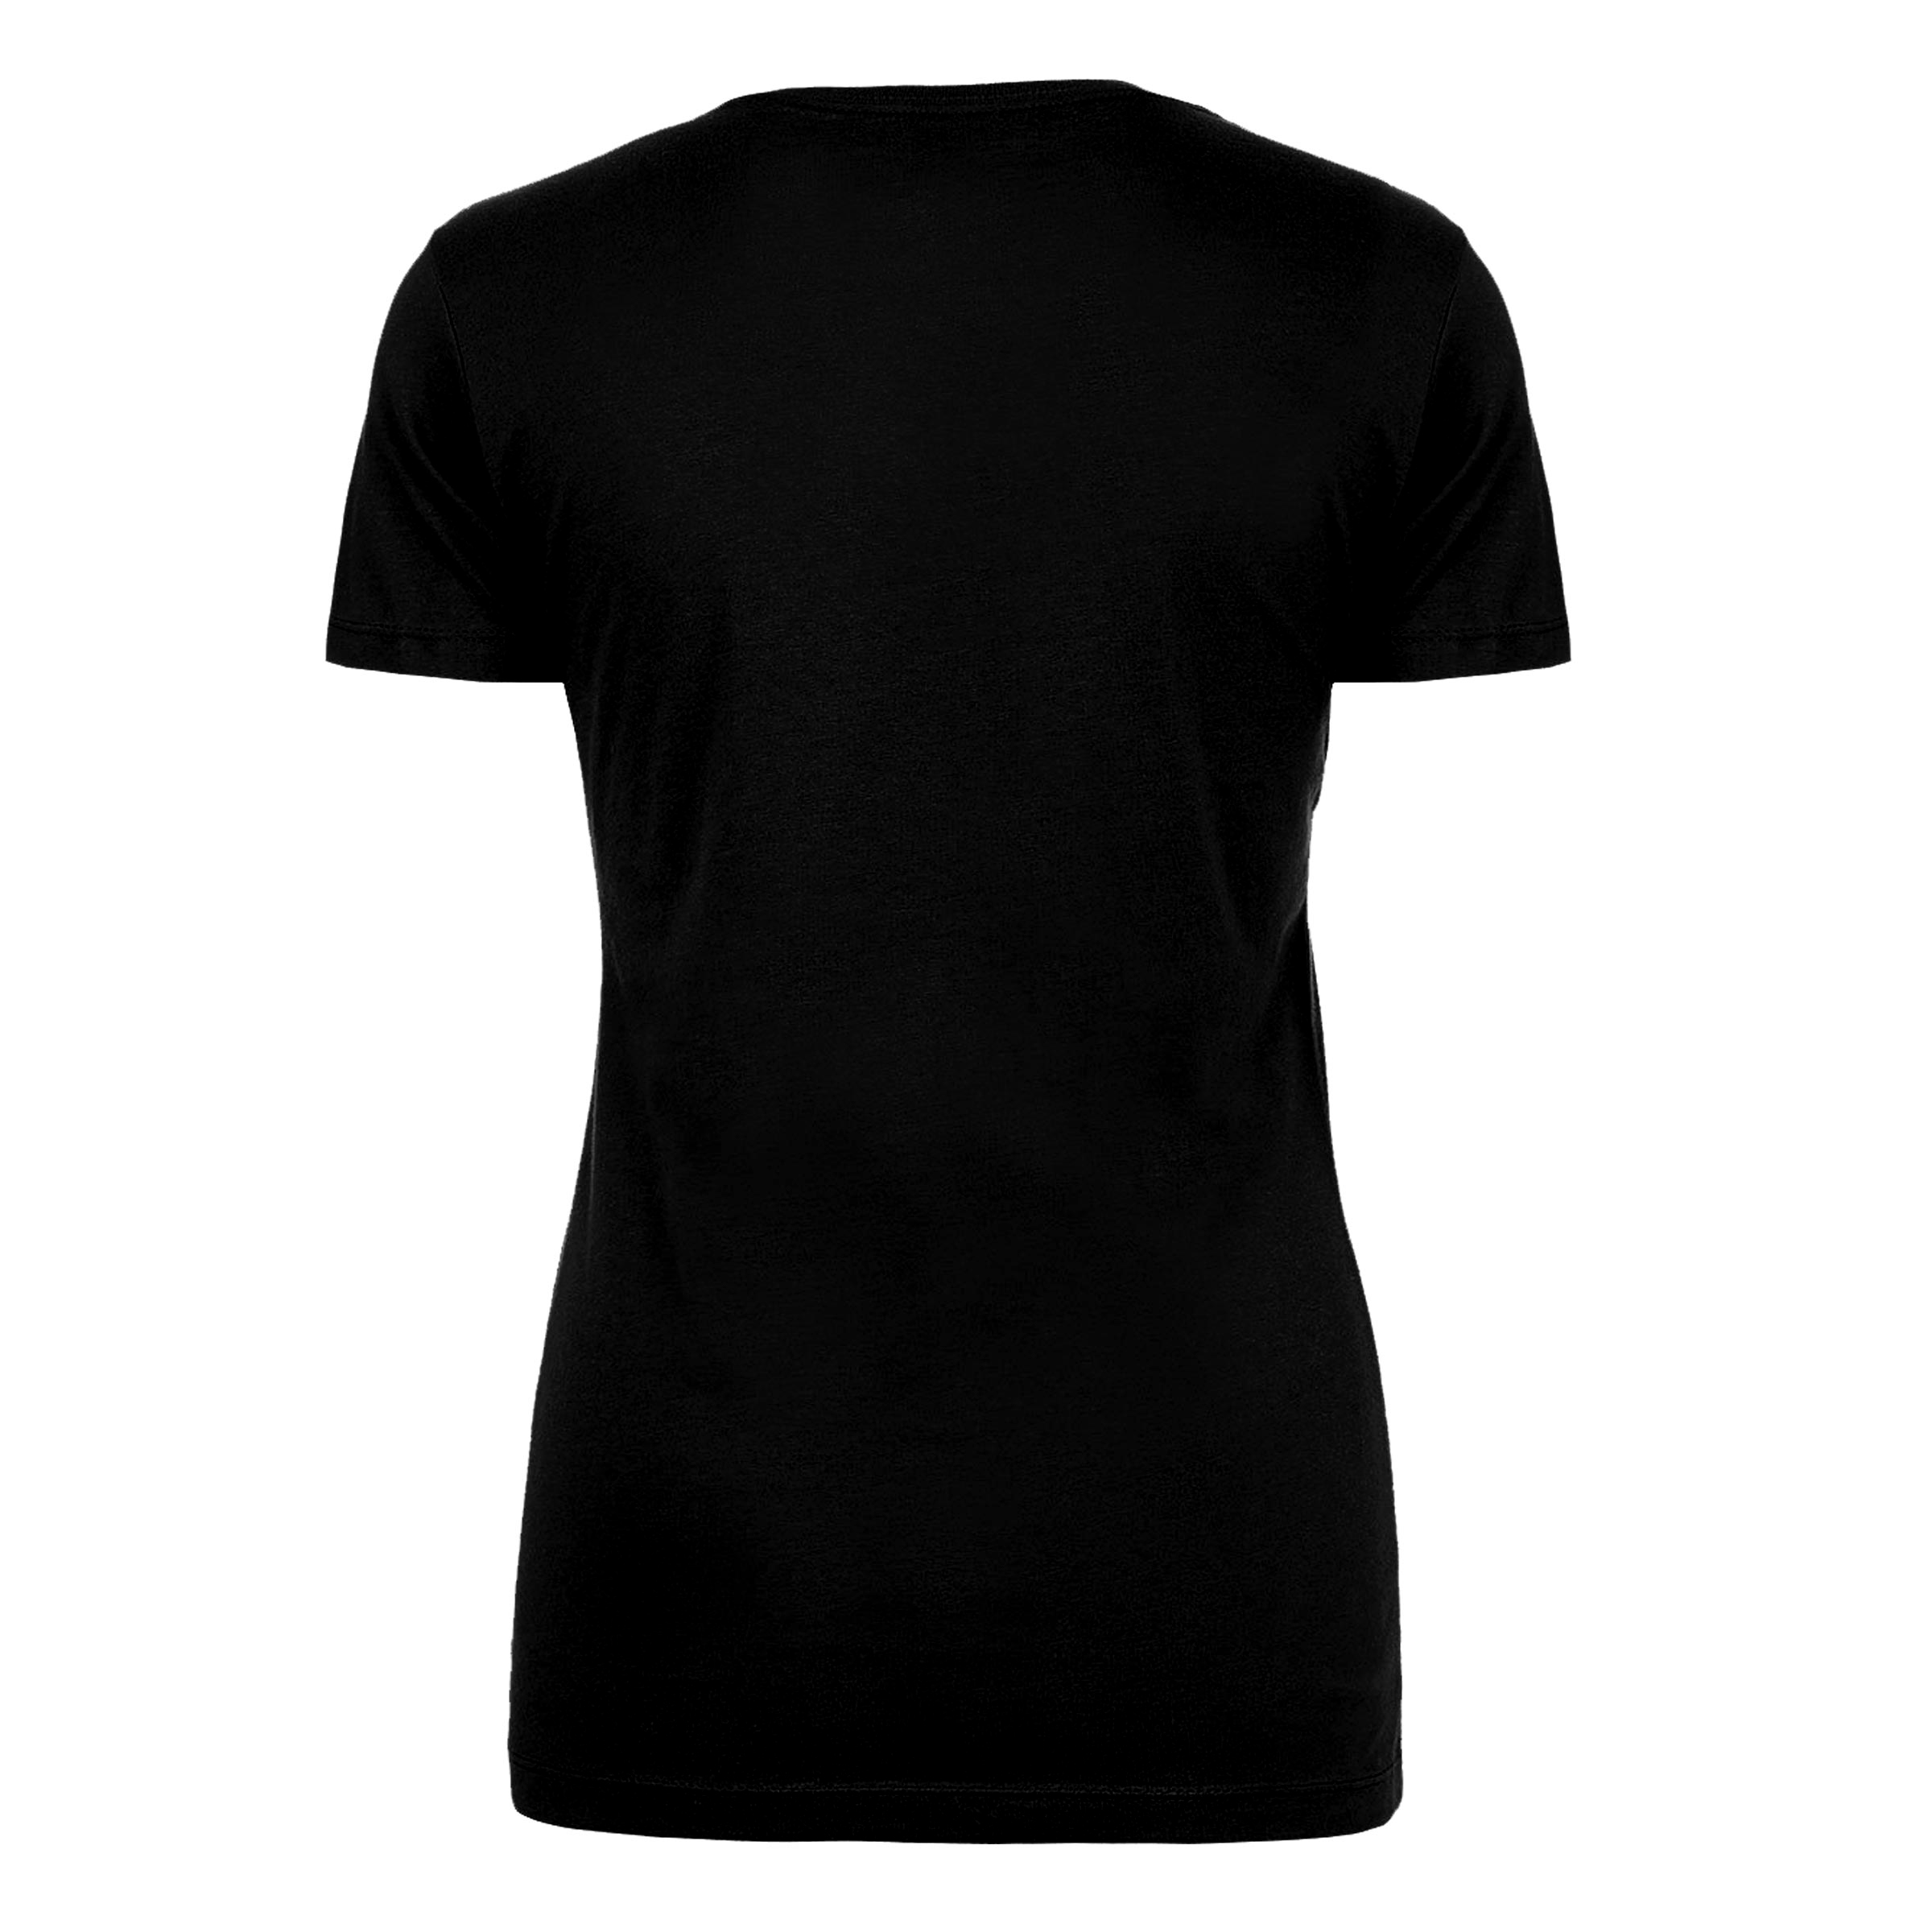 How to find the Best Fitting T-shirt for Men and Women – Beyond the Blank